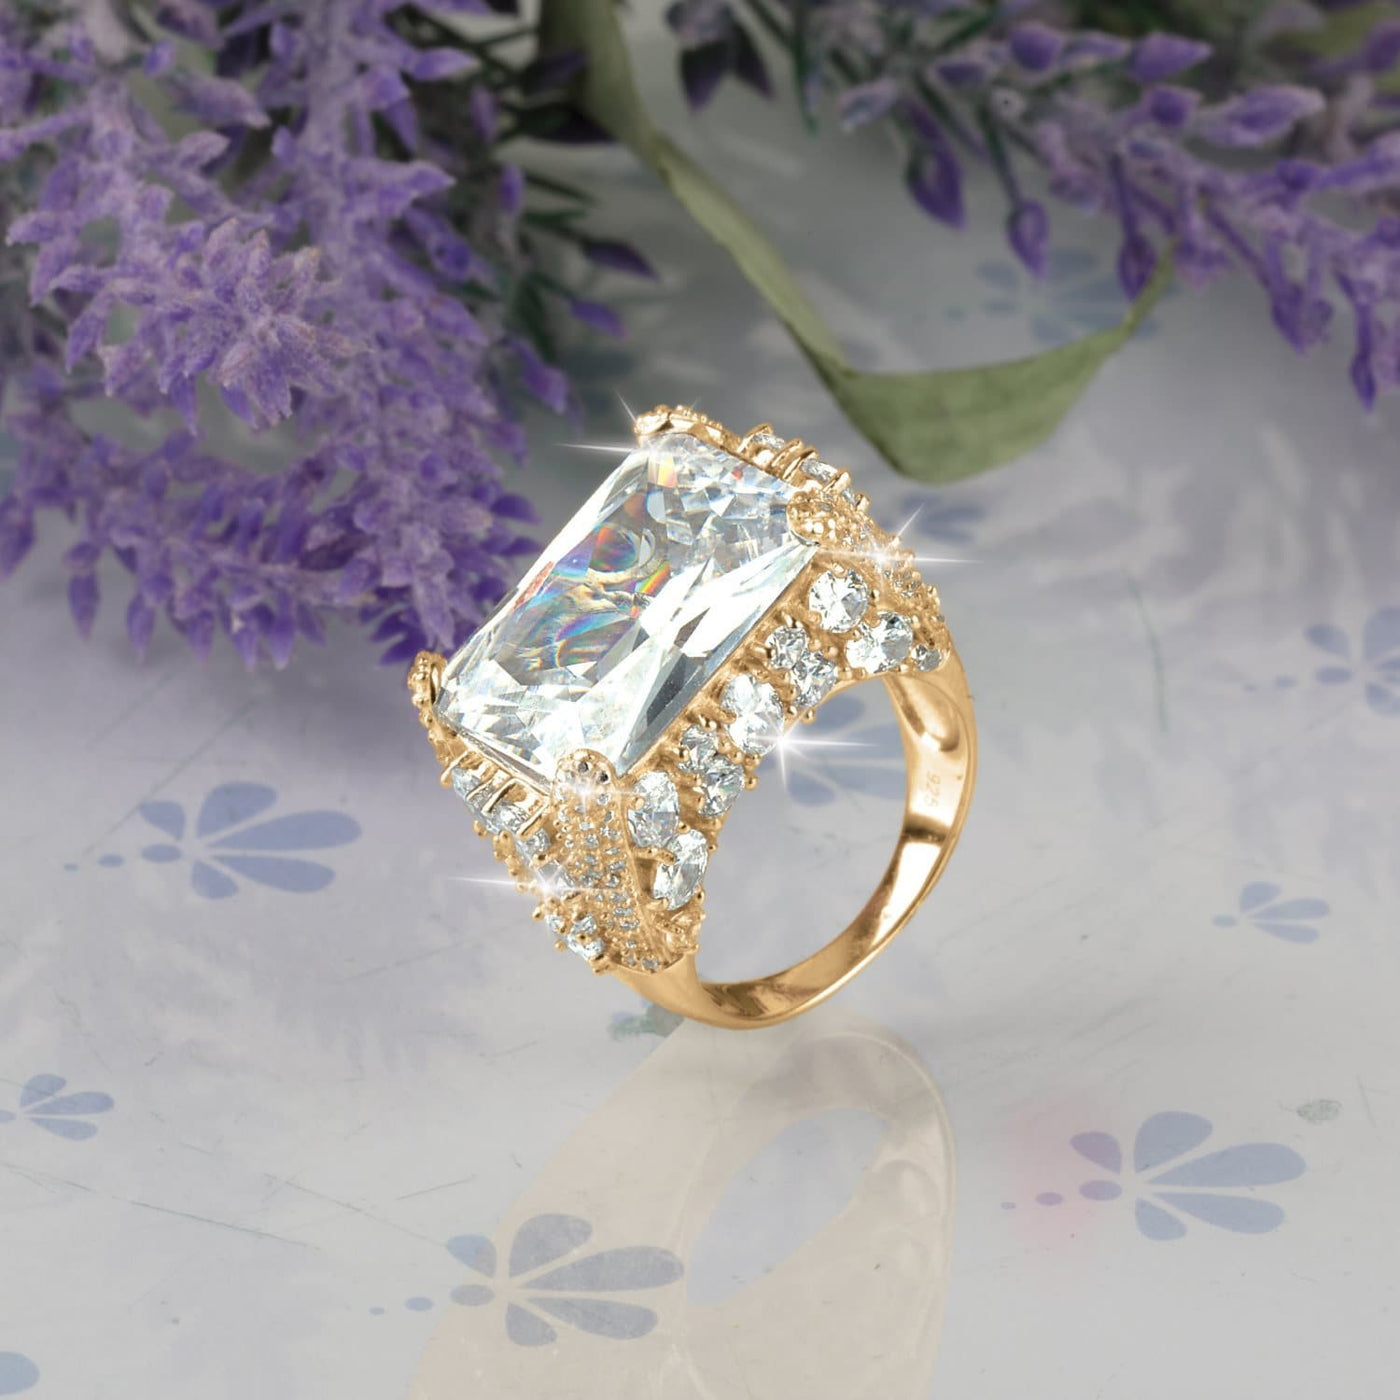 Daniel Steiger Limited Edition Lumiere Ring